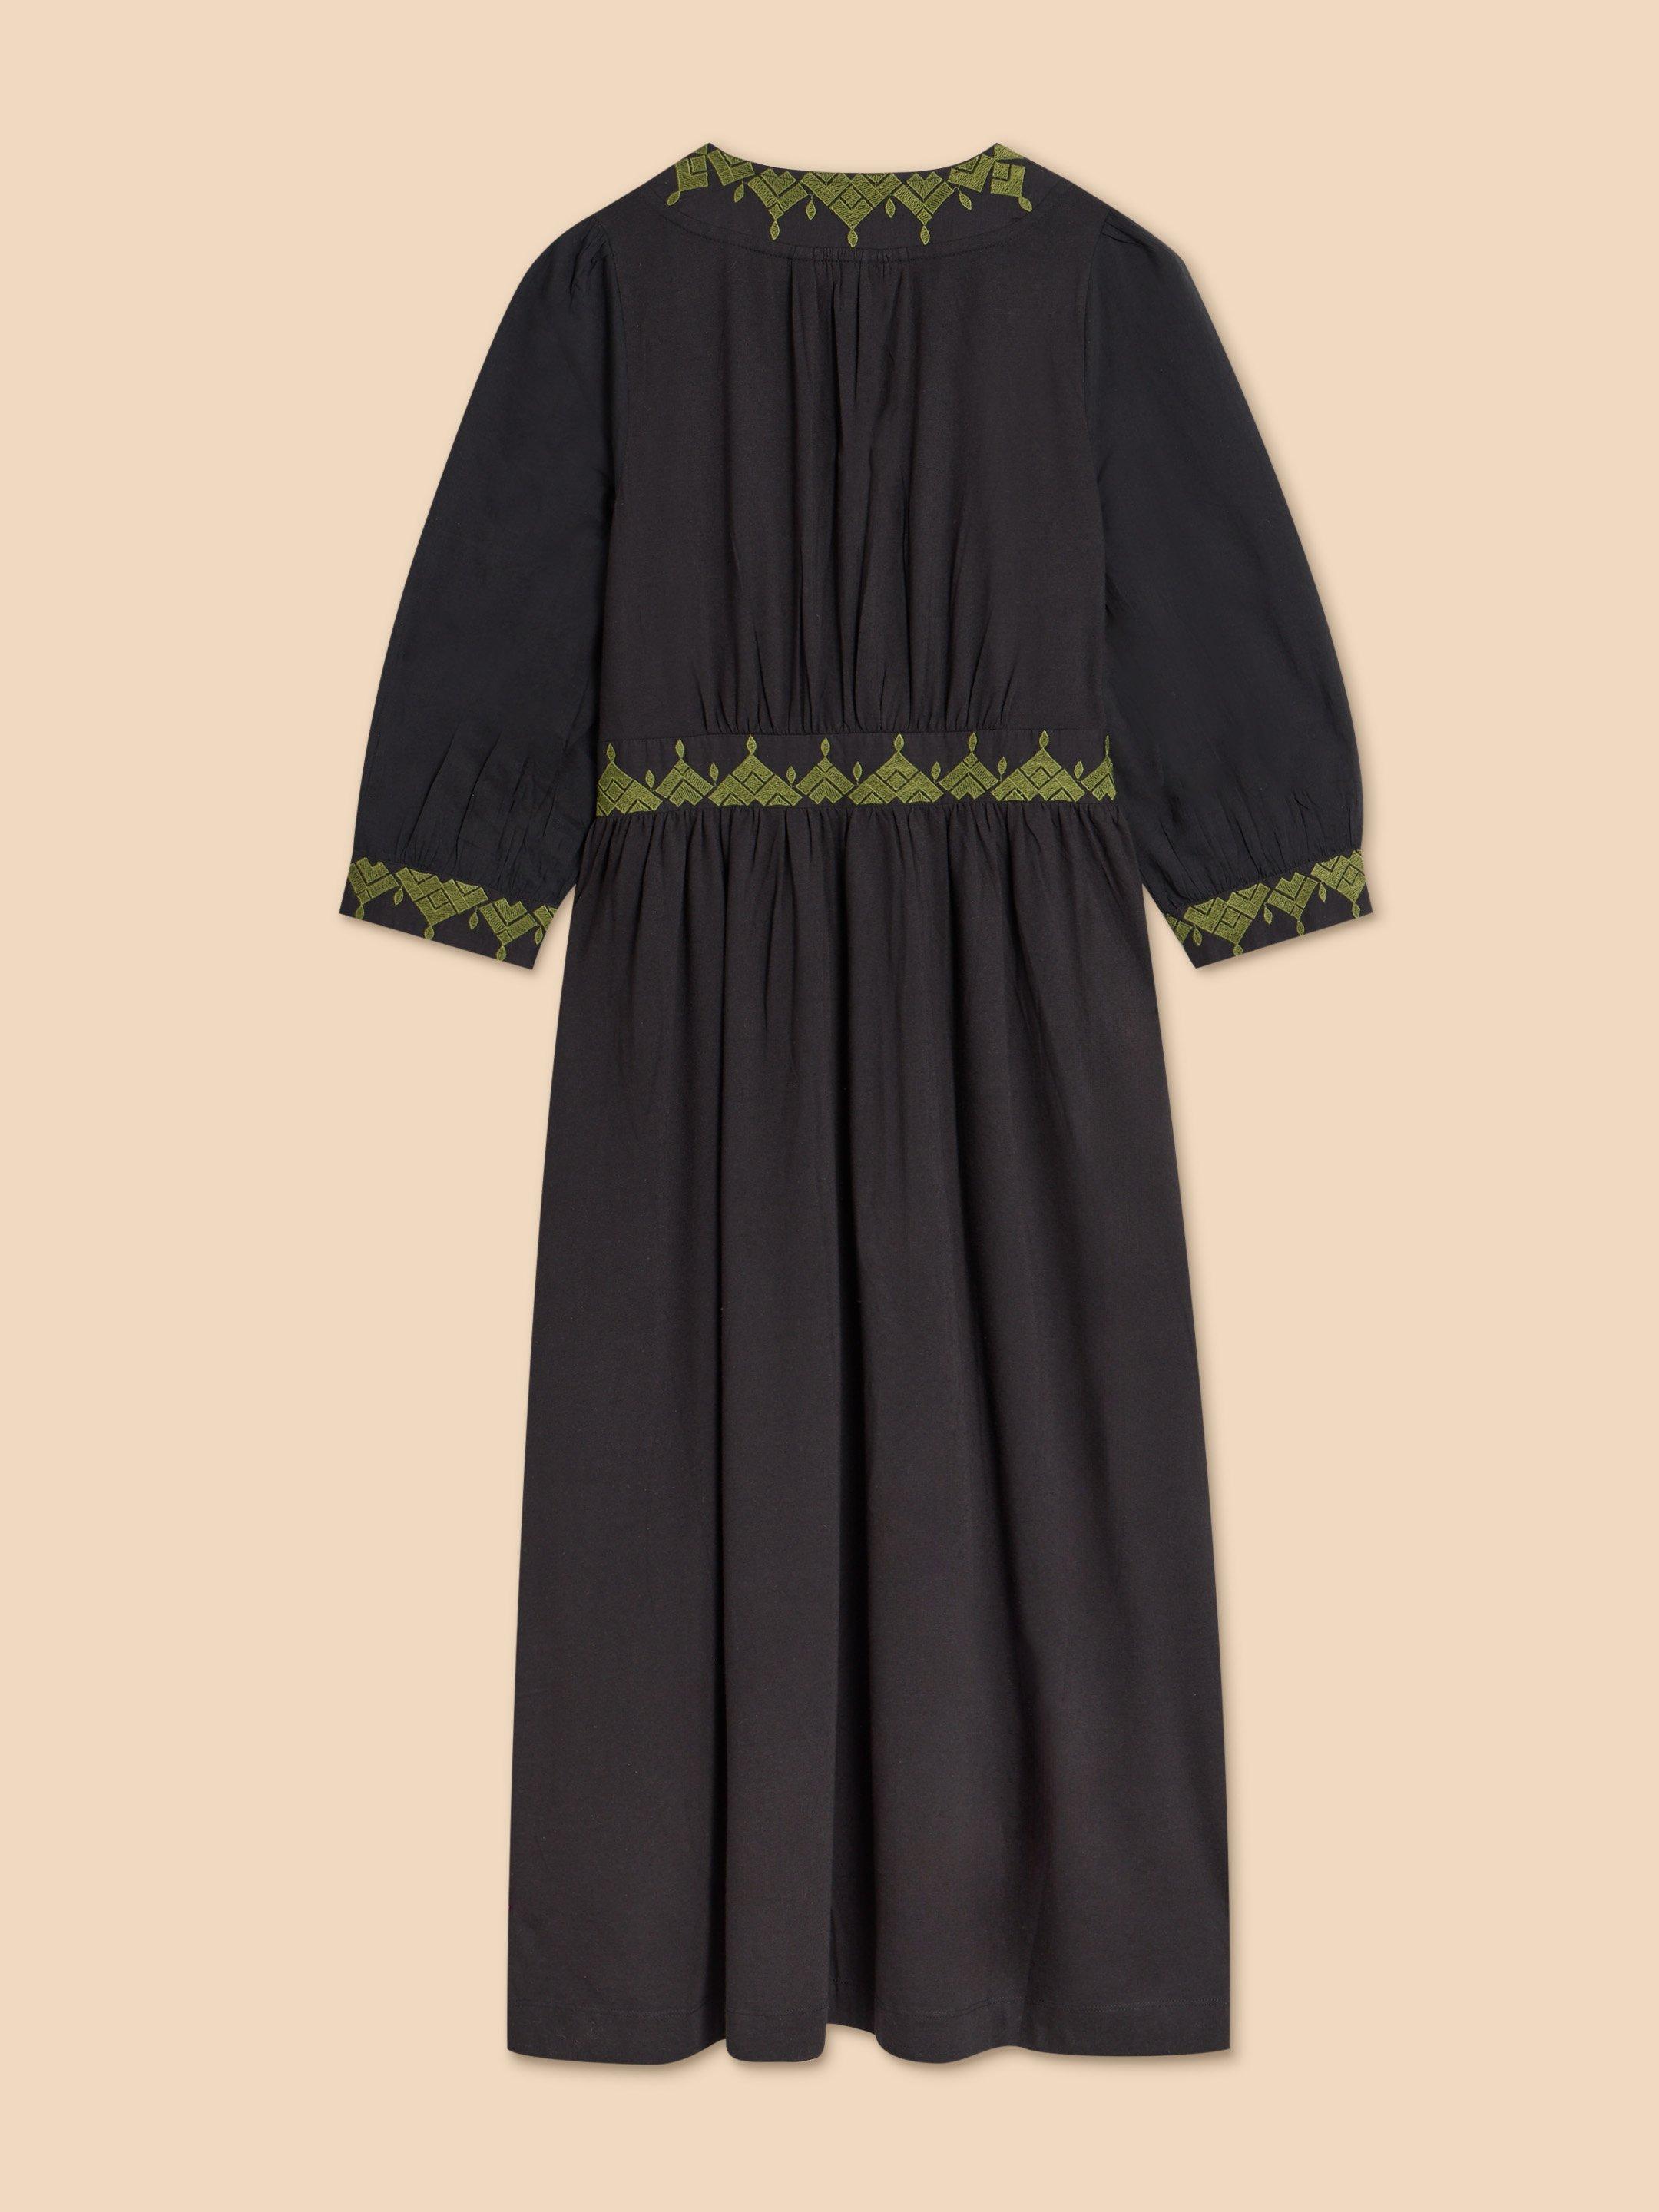 Emery Embroidered Jersey Dress in BLK MLT - FLAT BACK